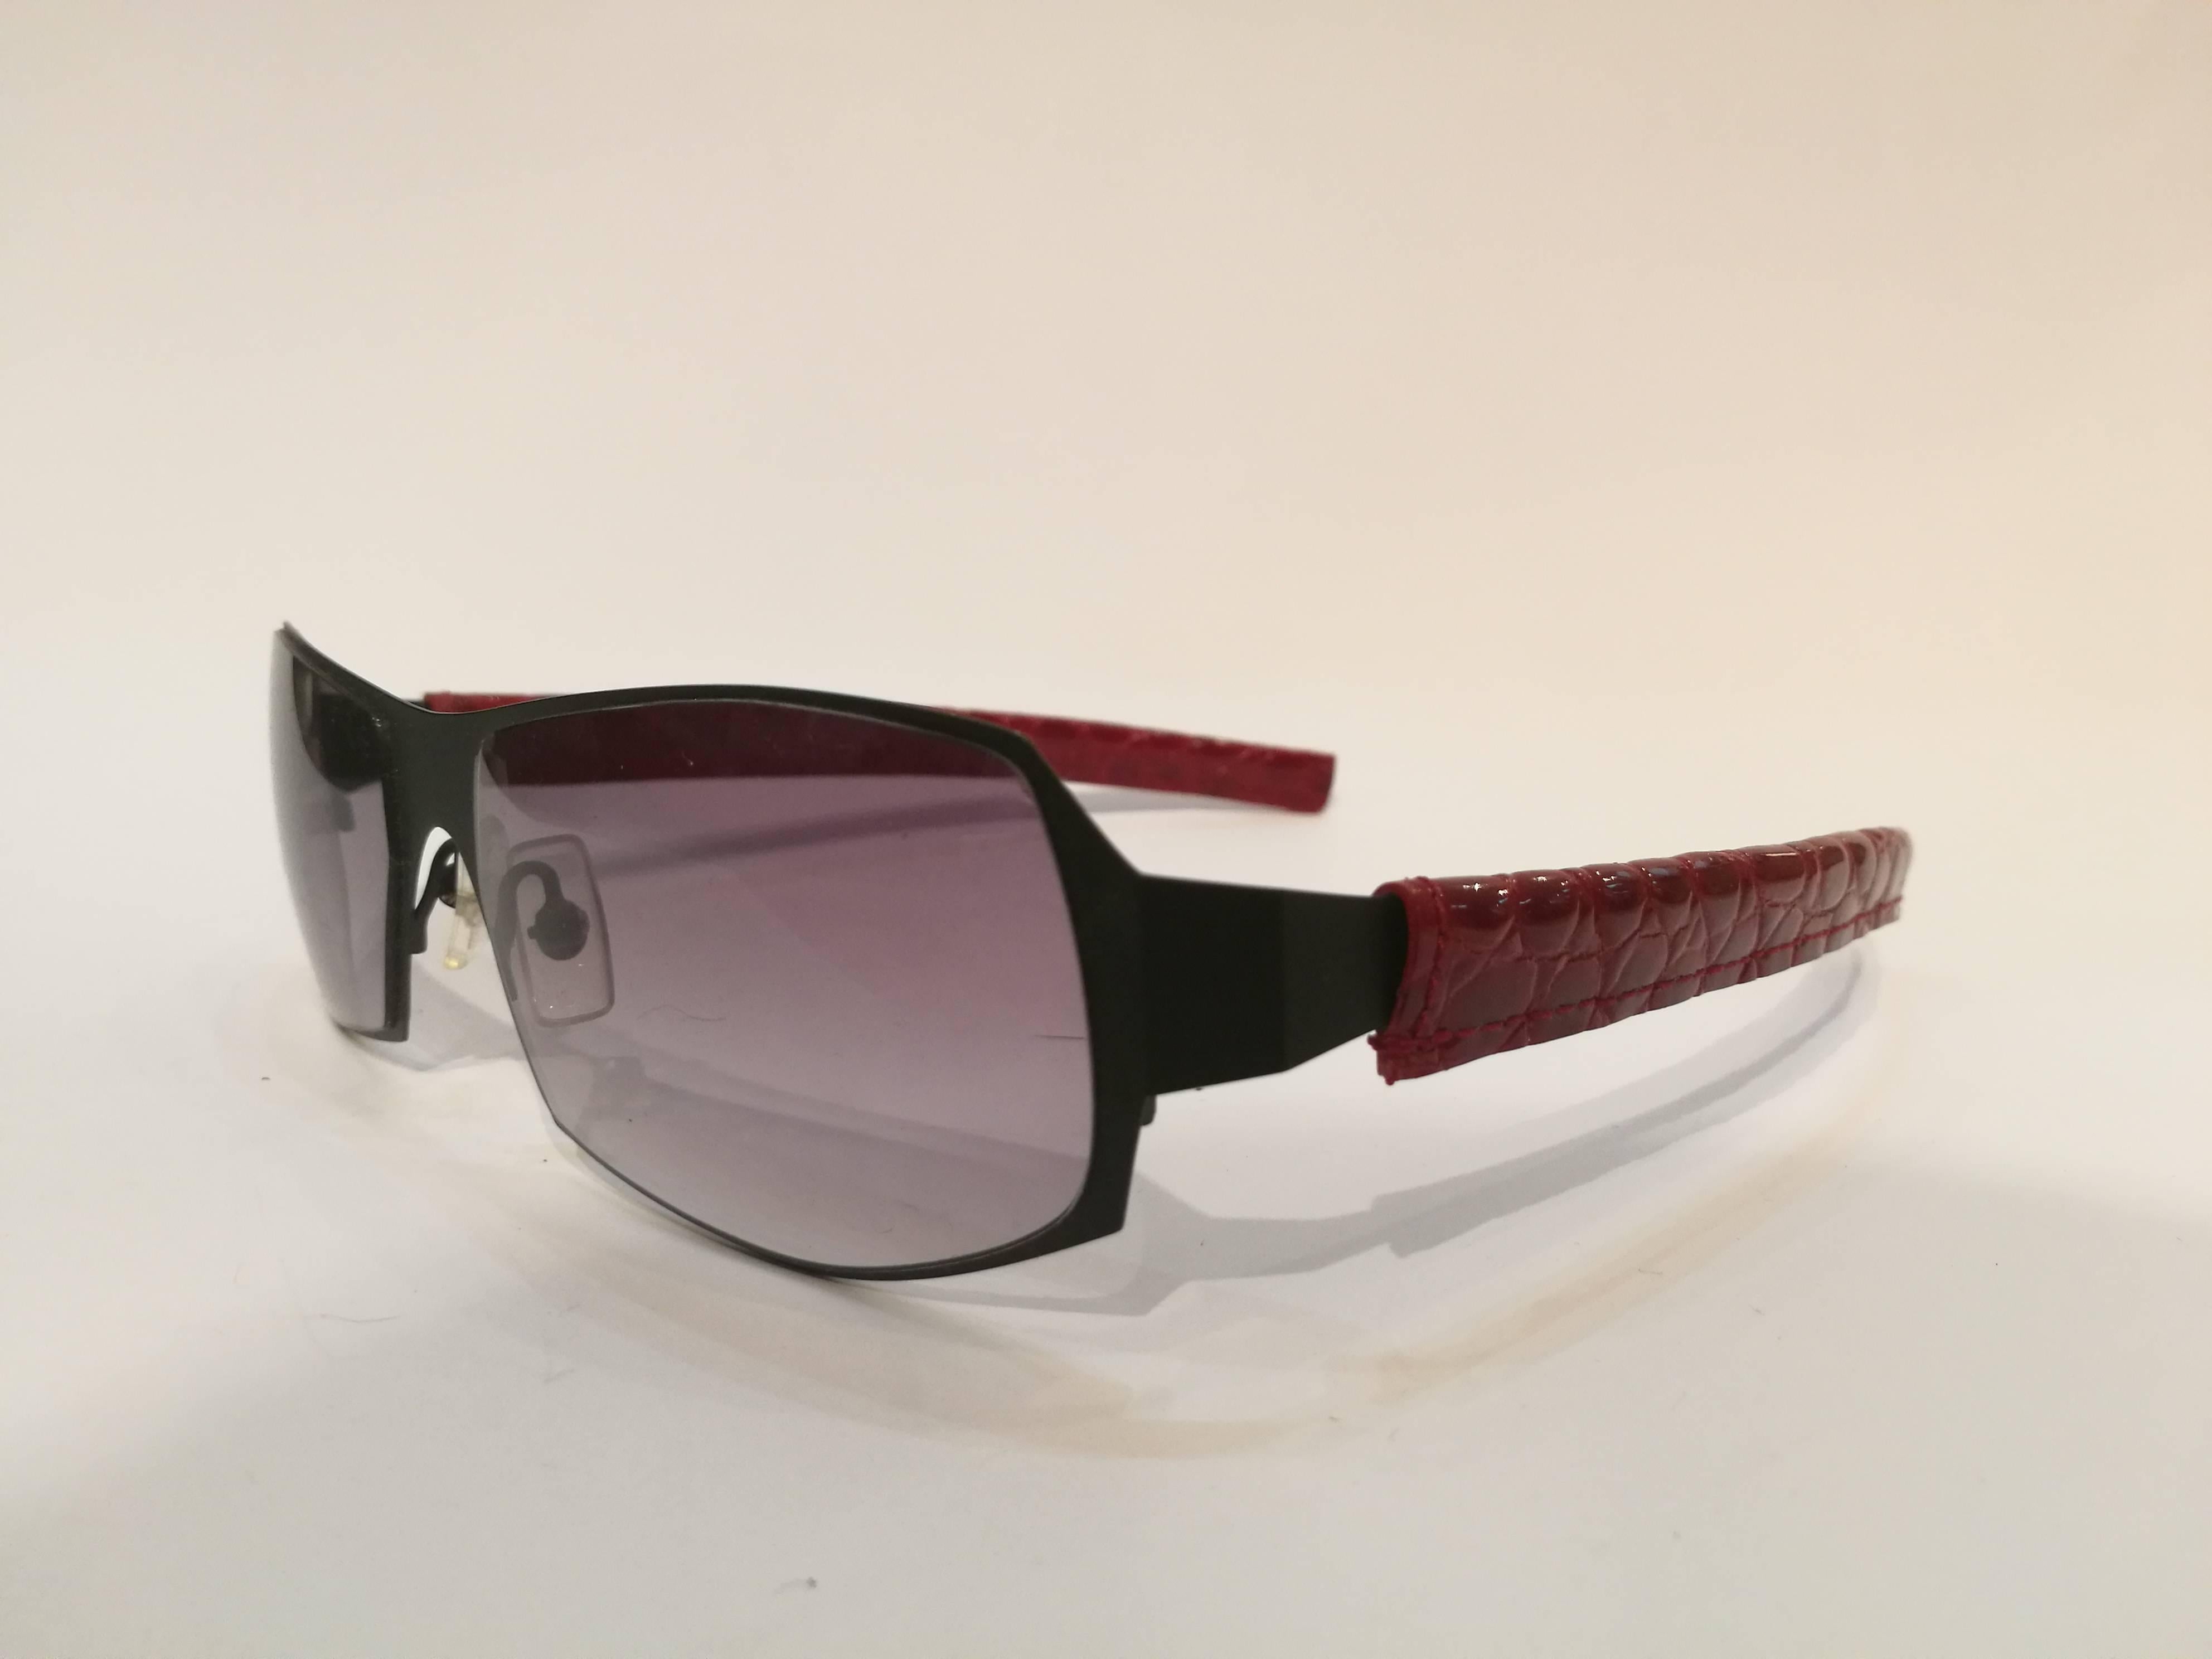 Less Than Human Sunglasses

Black tone with red removible python skin 